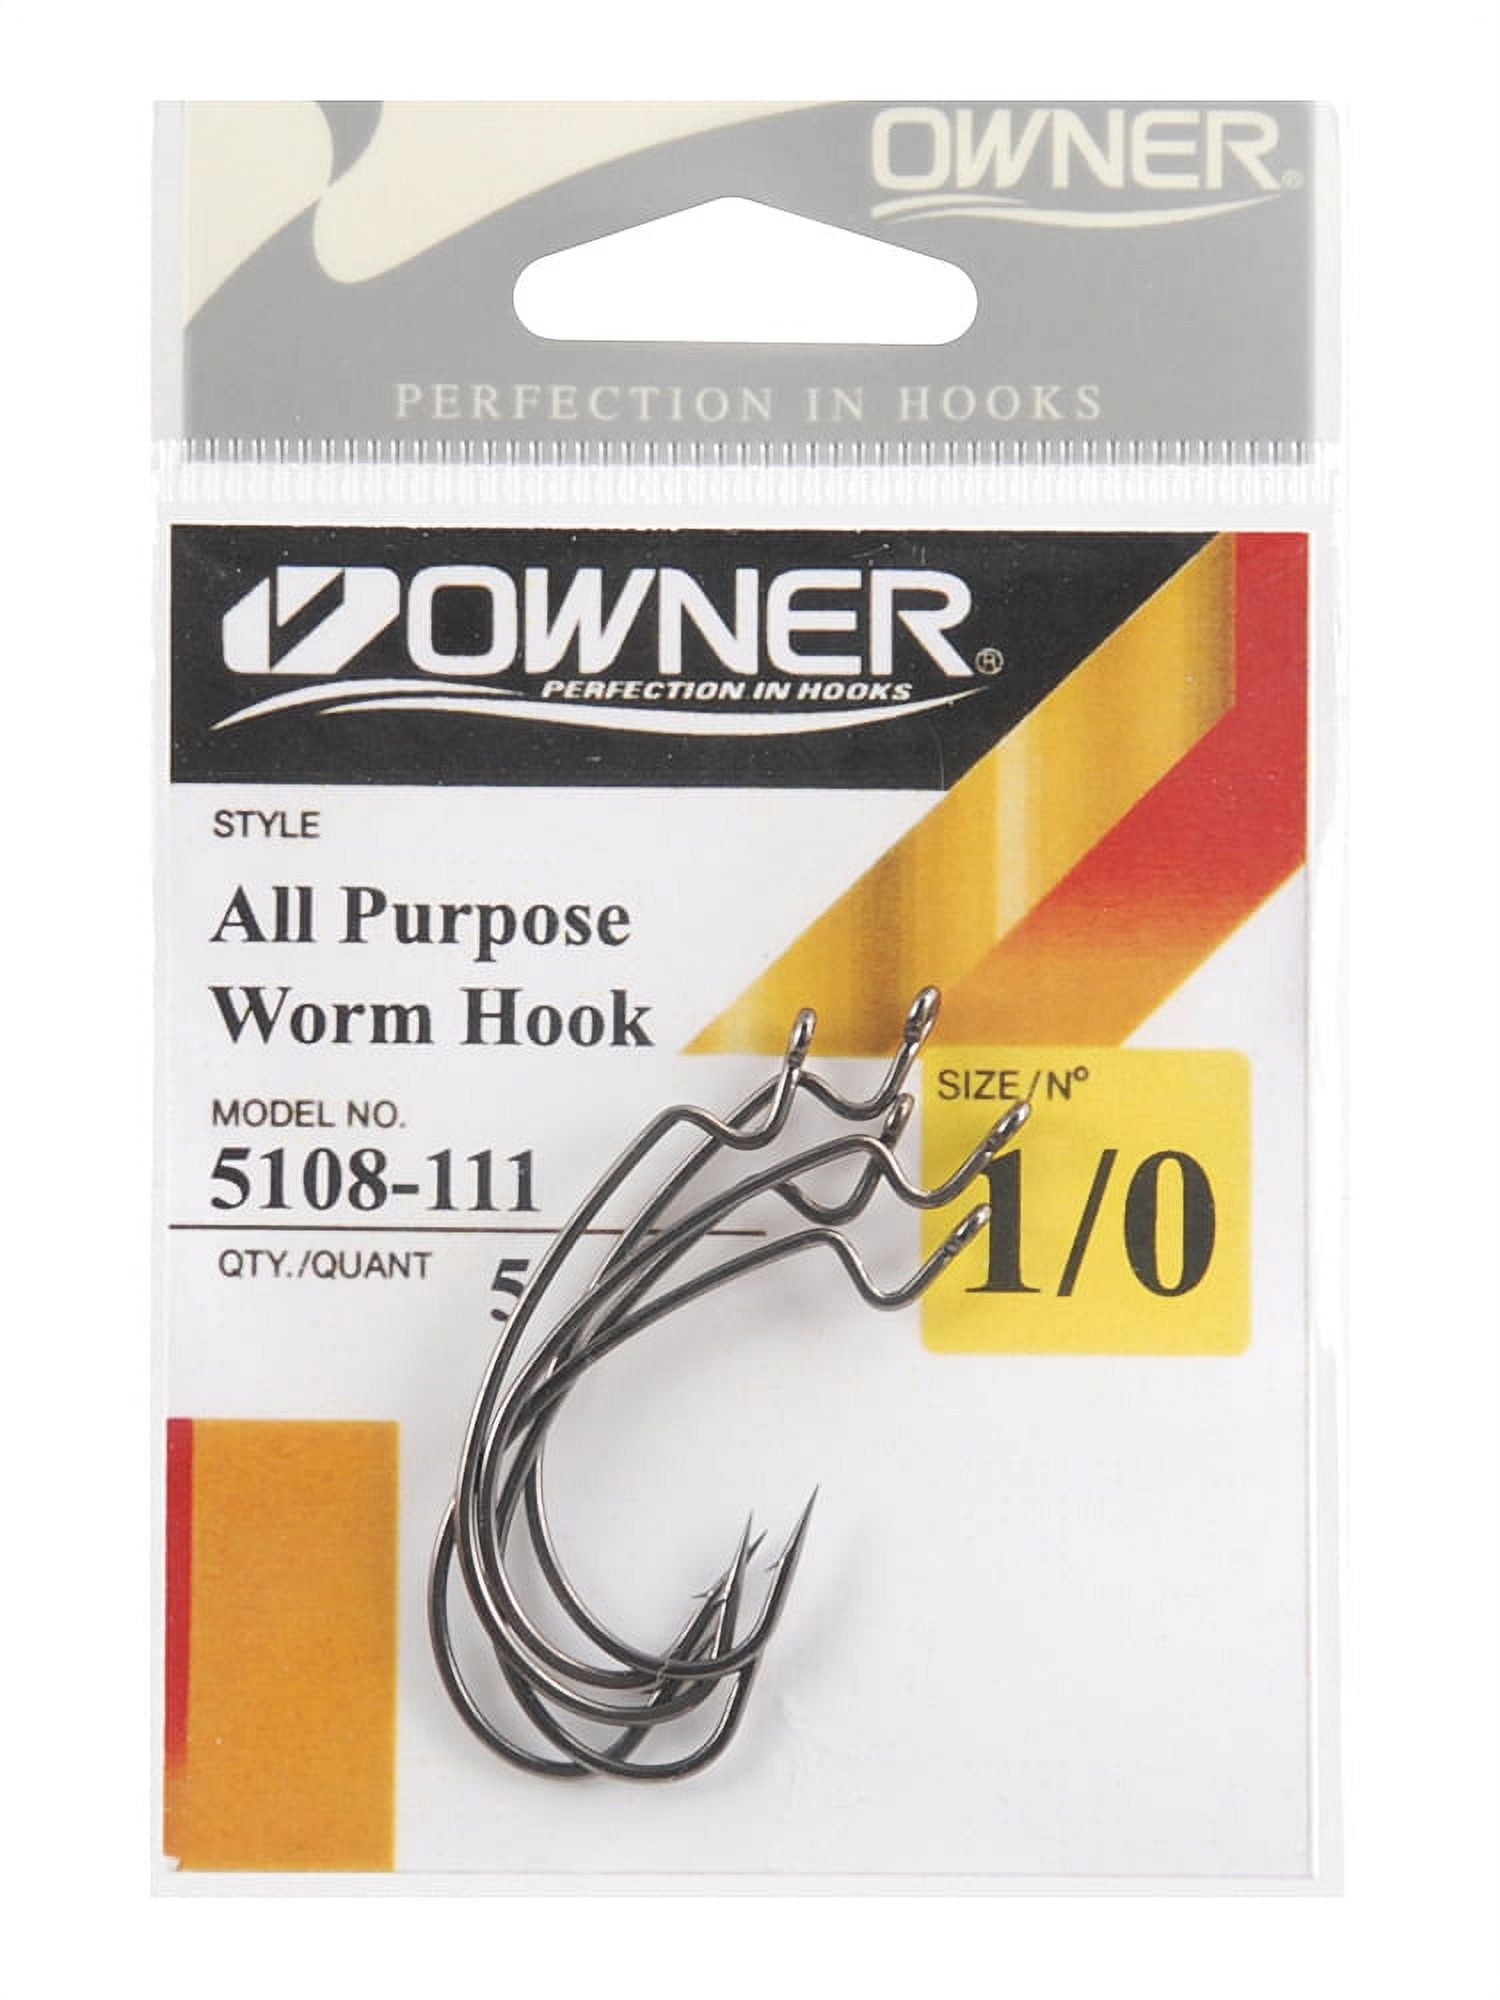 Owner 5108-111 All Purpose Soft Bait Hook 5 per Pack Size 1/0 Fishing Hook